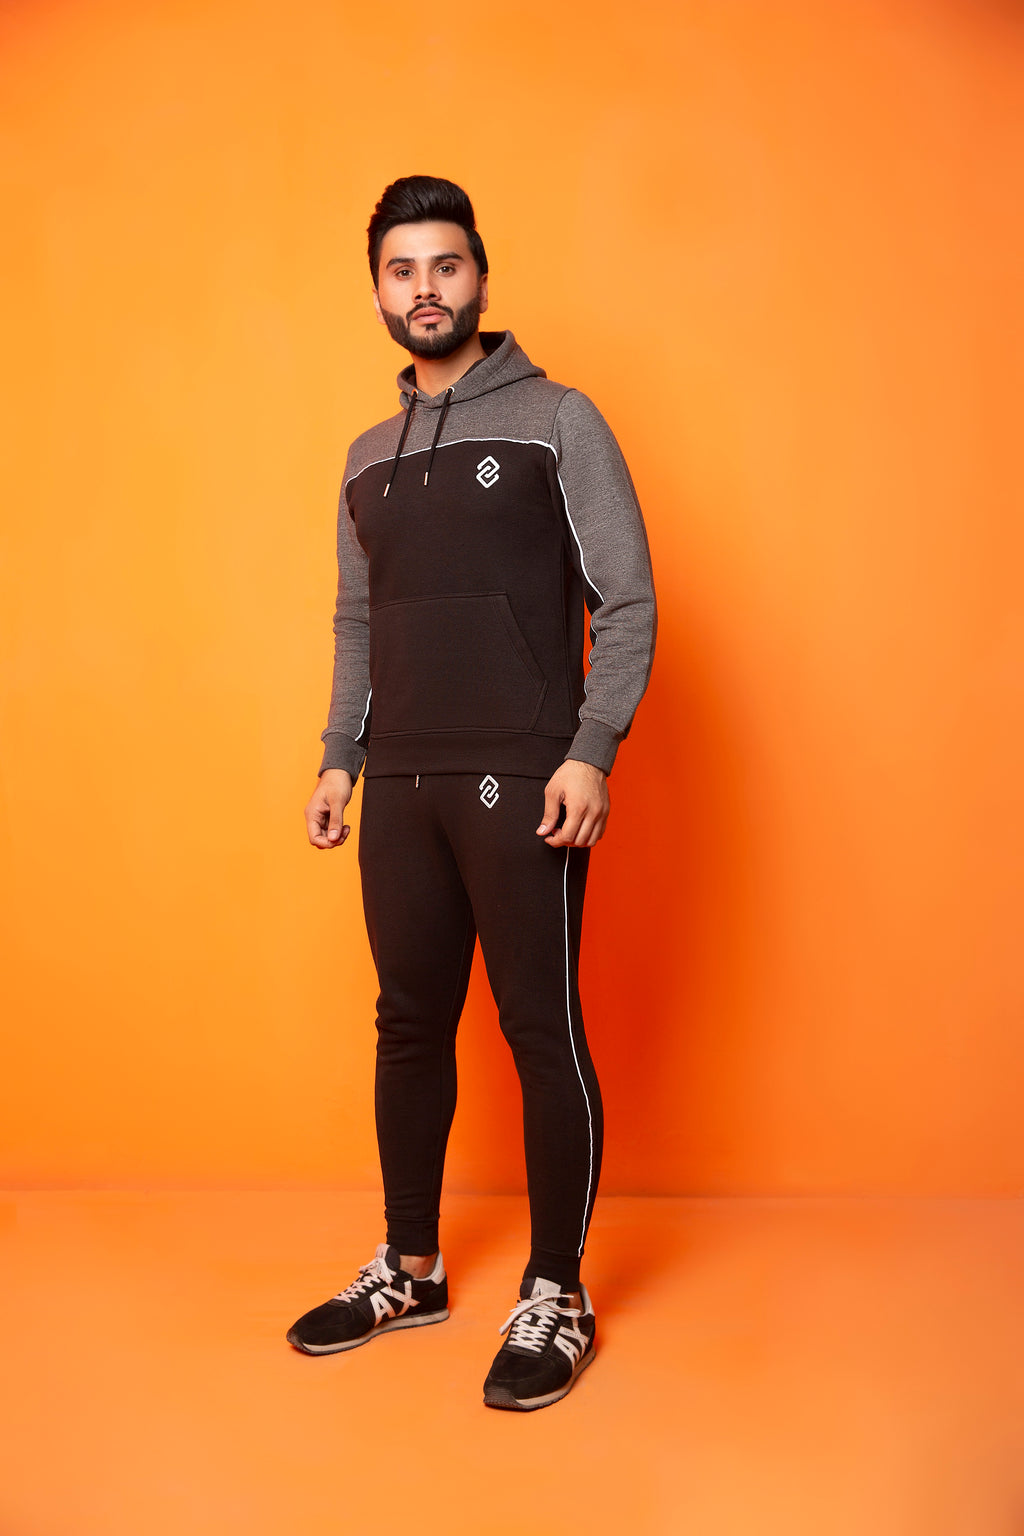 Buy Men's Baylan Style Track Suit at Lowest Price in Pakistan